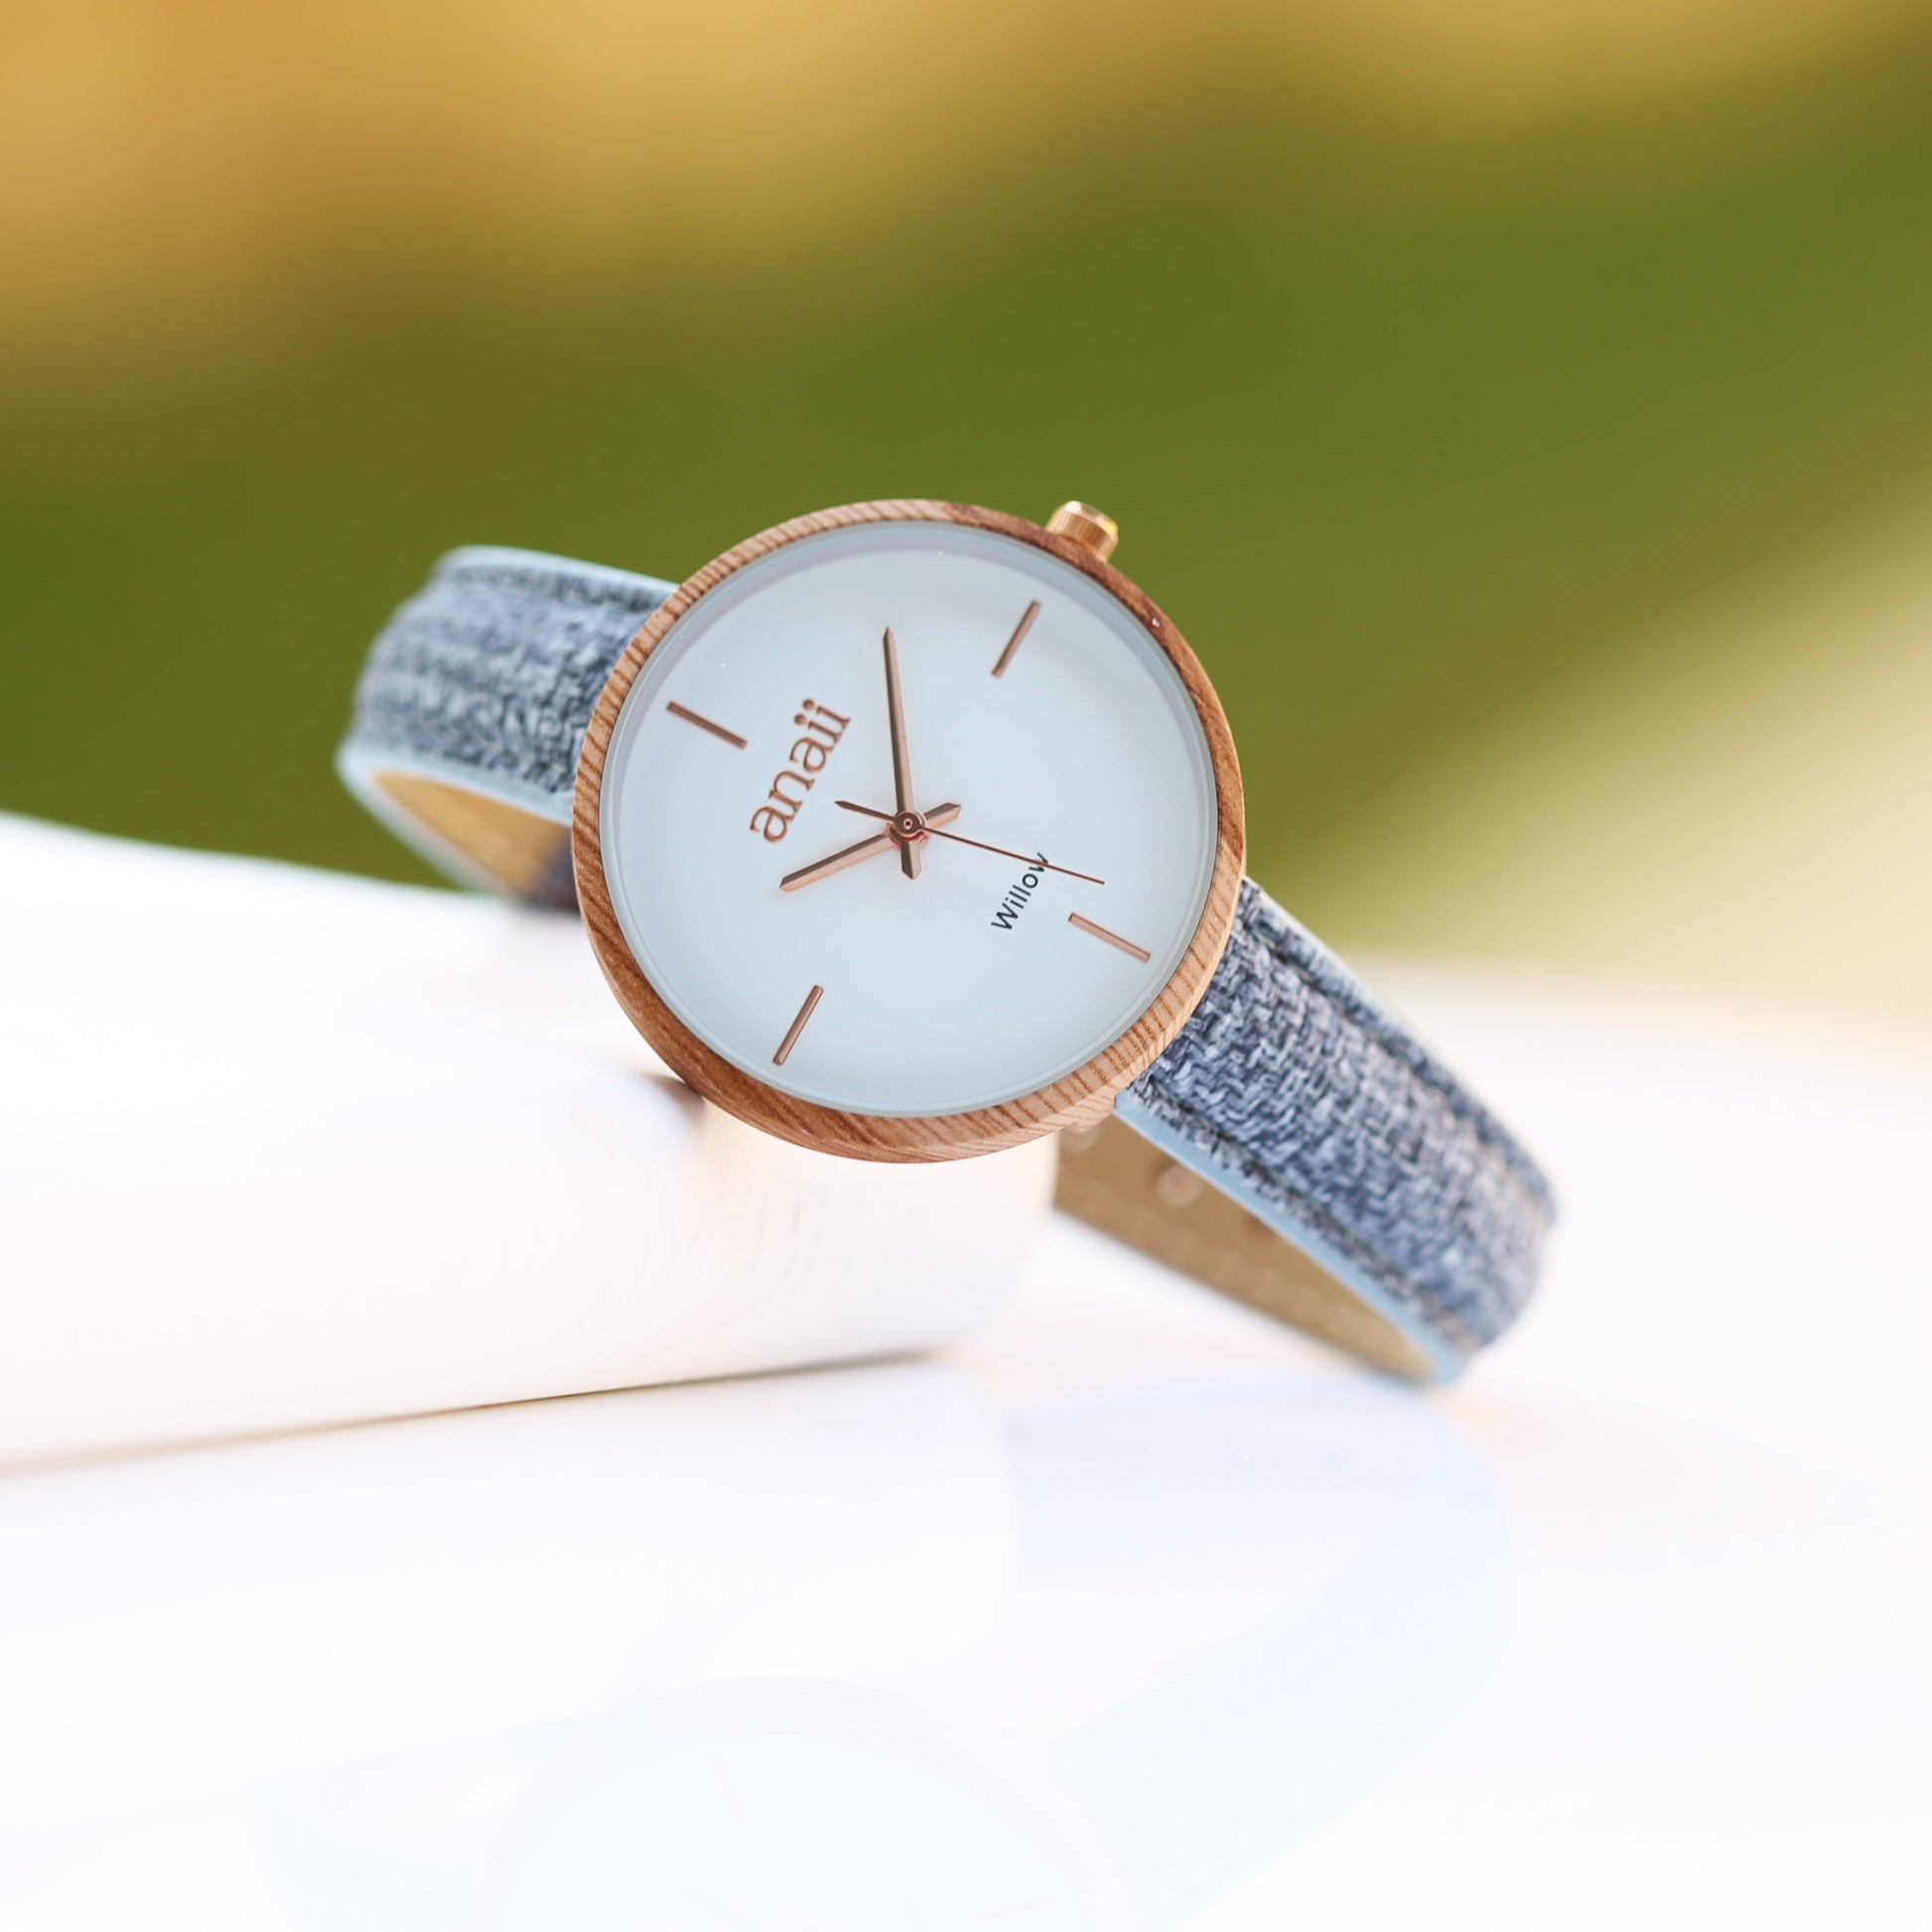 Personalized Ladies' Watches - Handwriting Engraved Watch in Lake Blue 